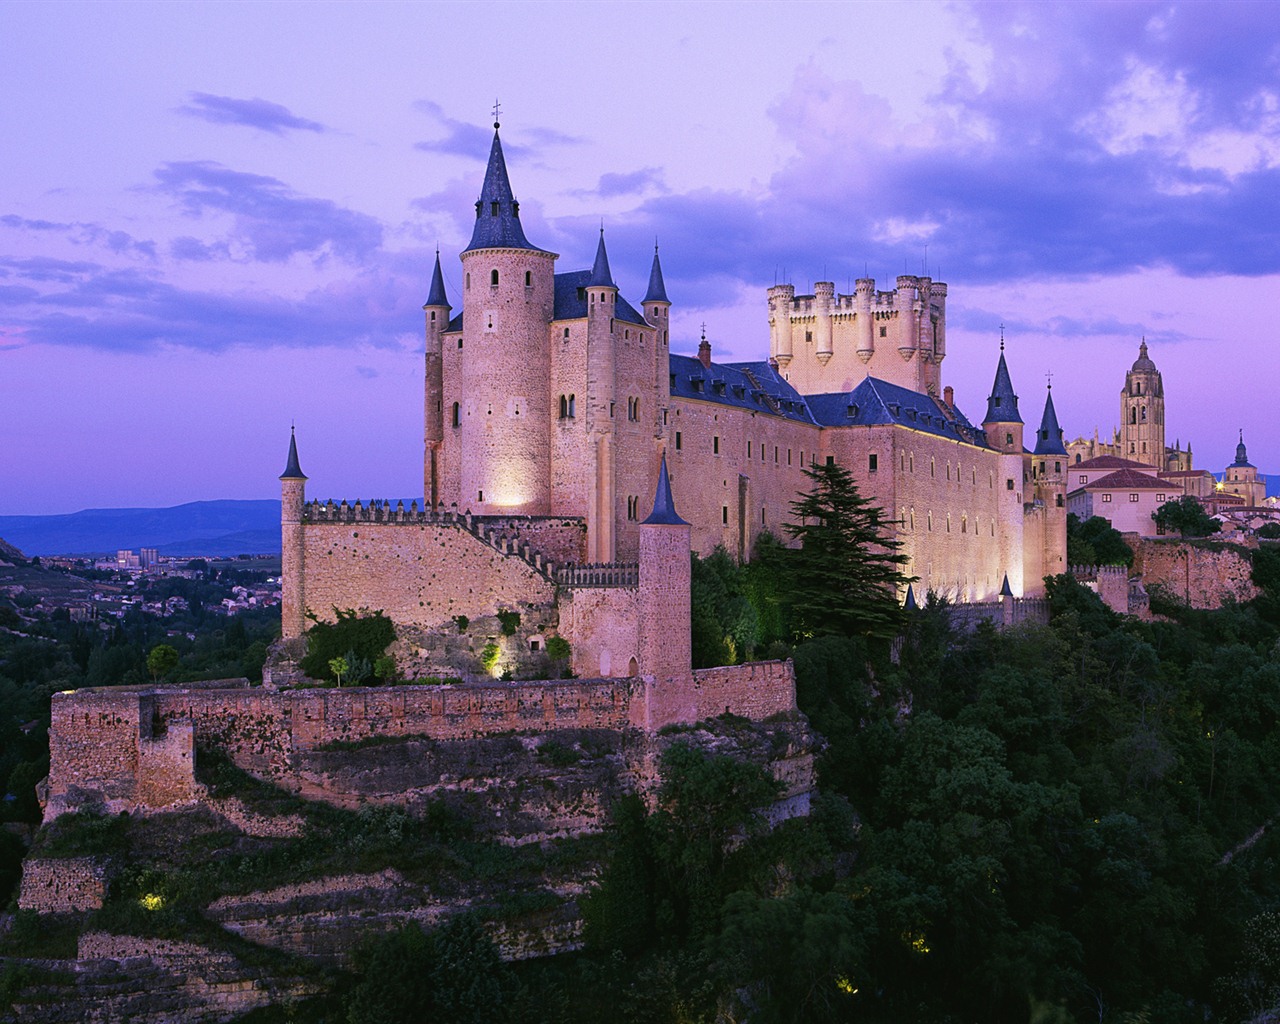 Windows 7 Wallpapers: Castles of Europe #1 - 1280x1024